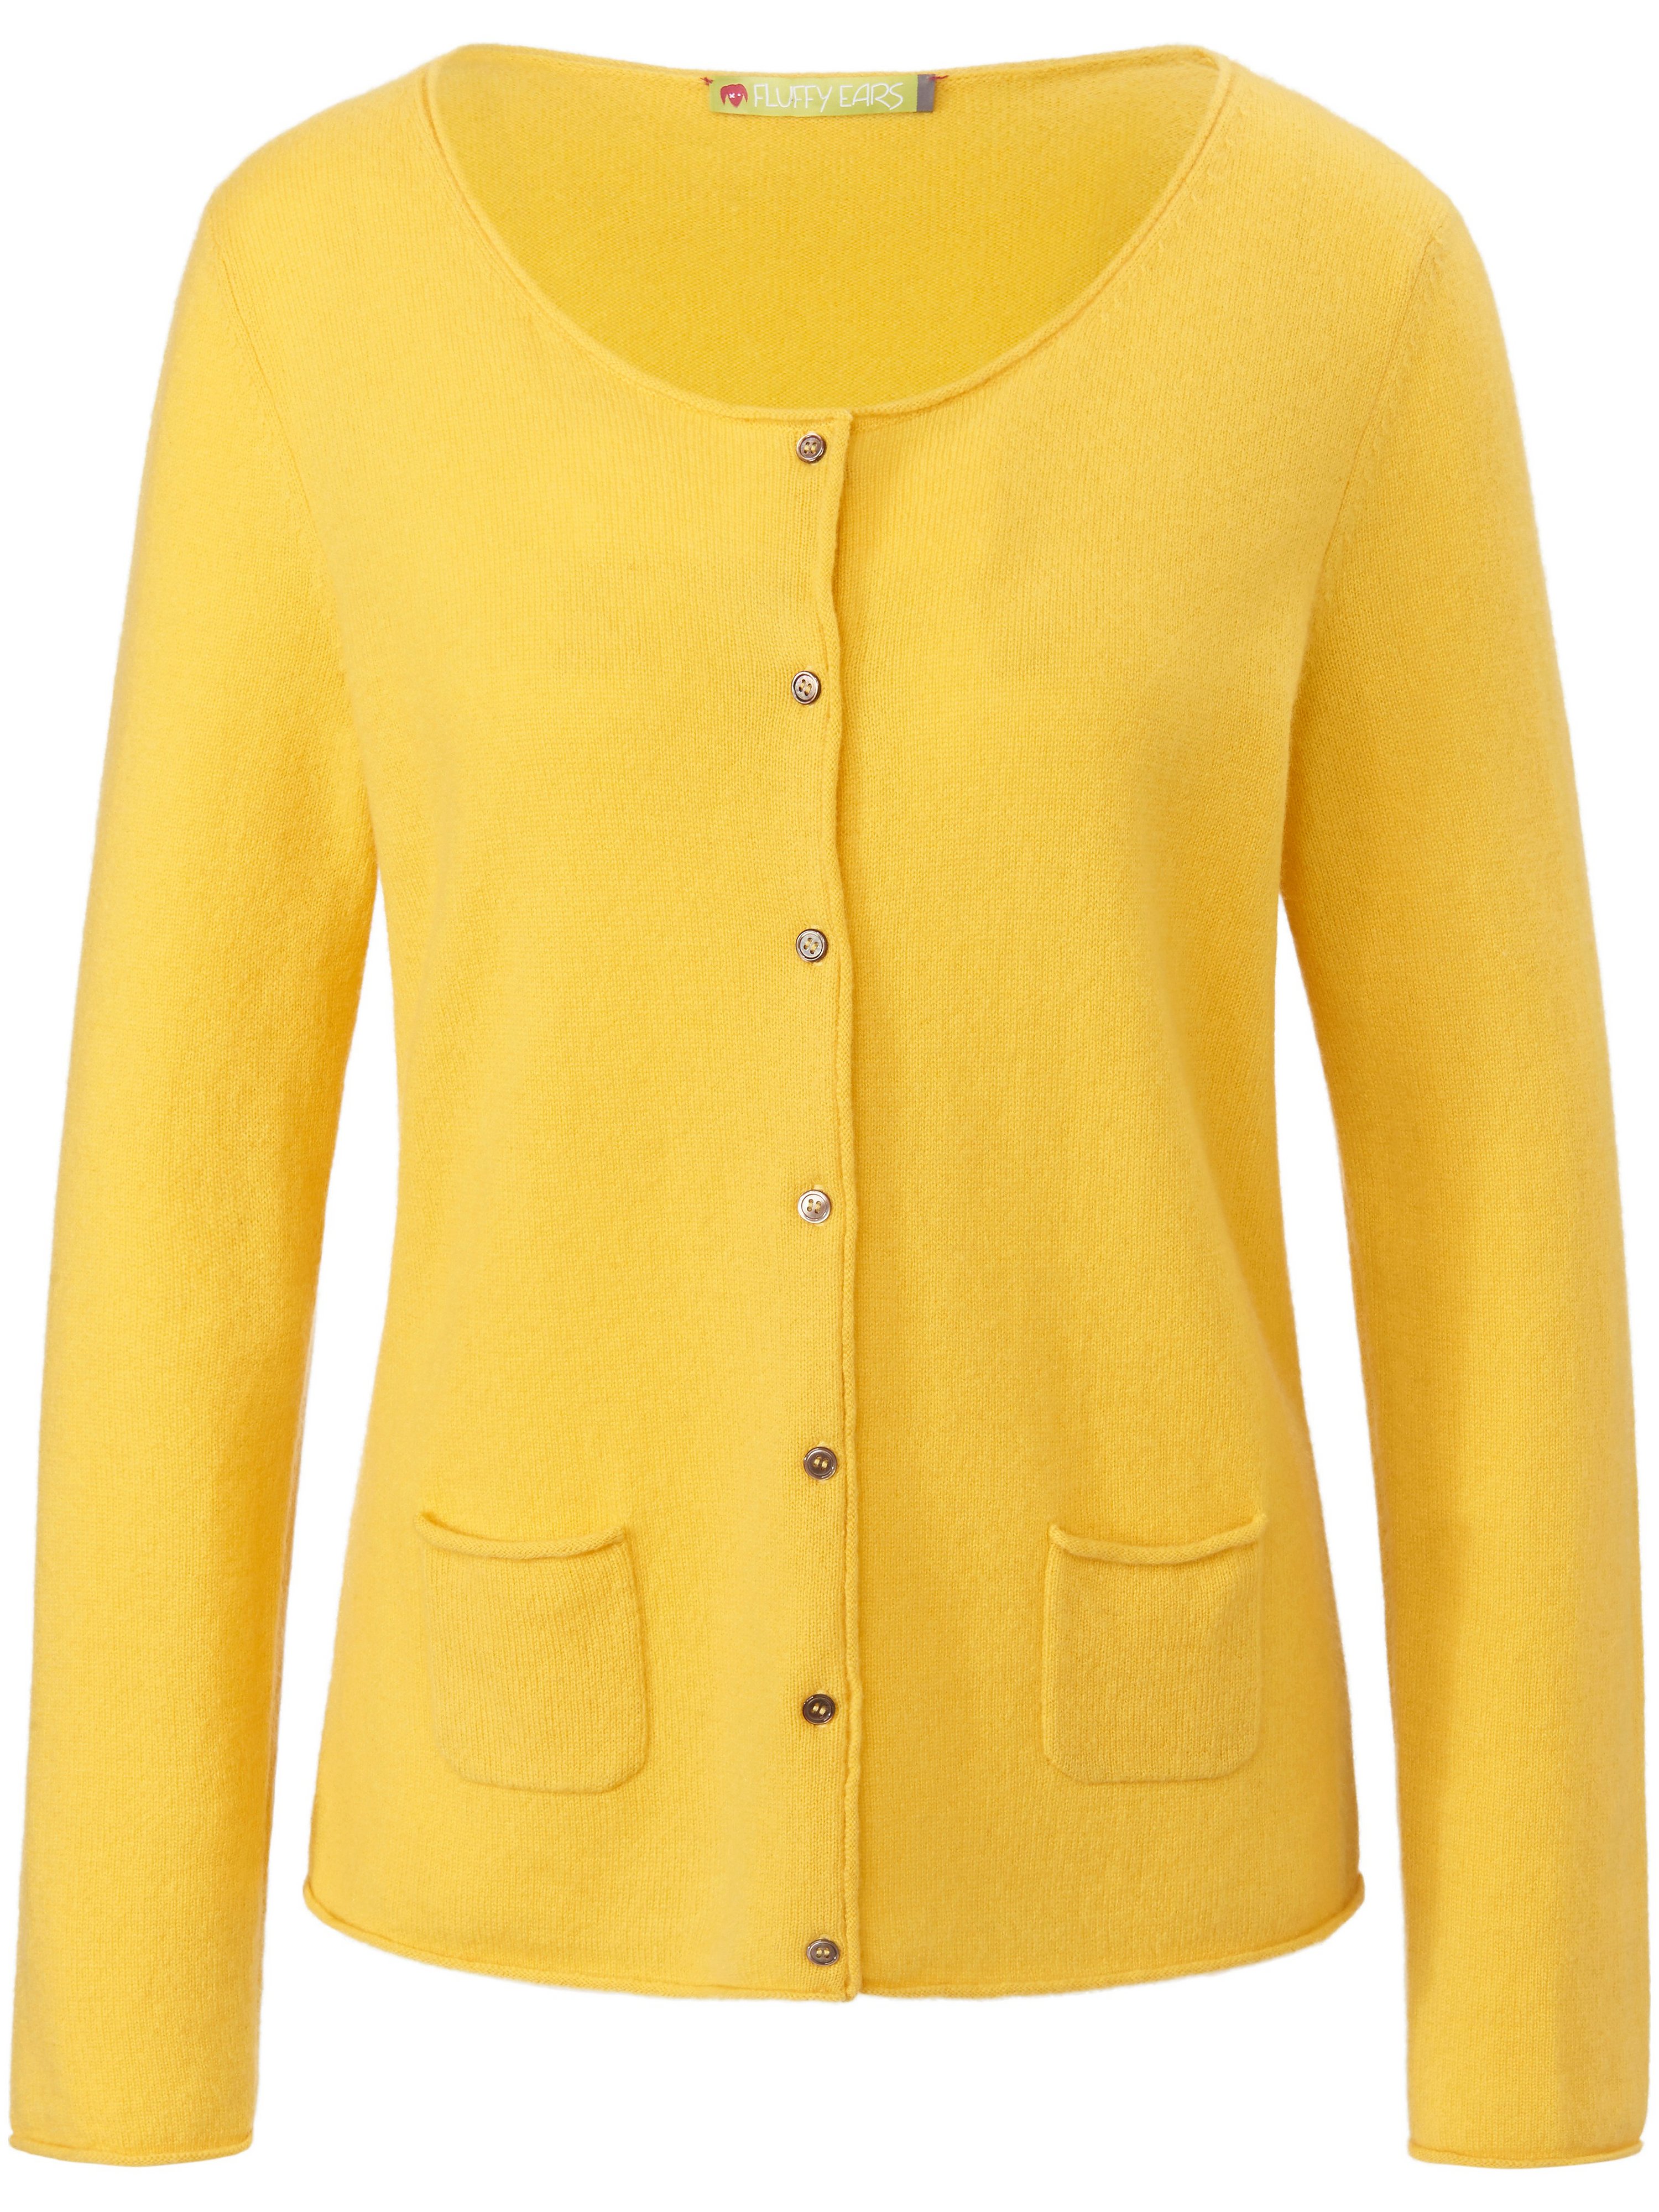 Le cardigan pur cachemire  FLUFFY EARS jaune taille 50